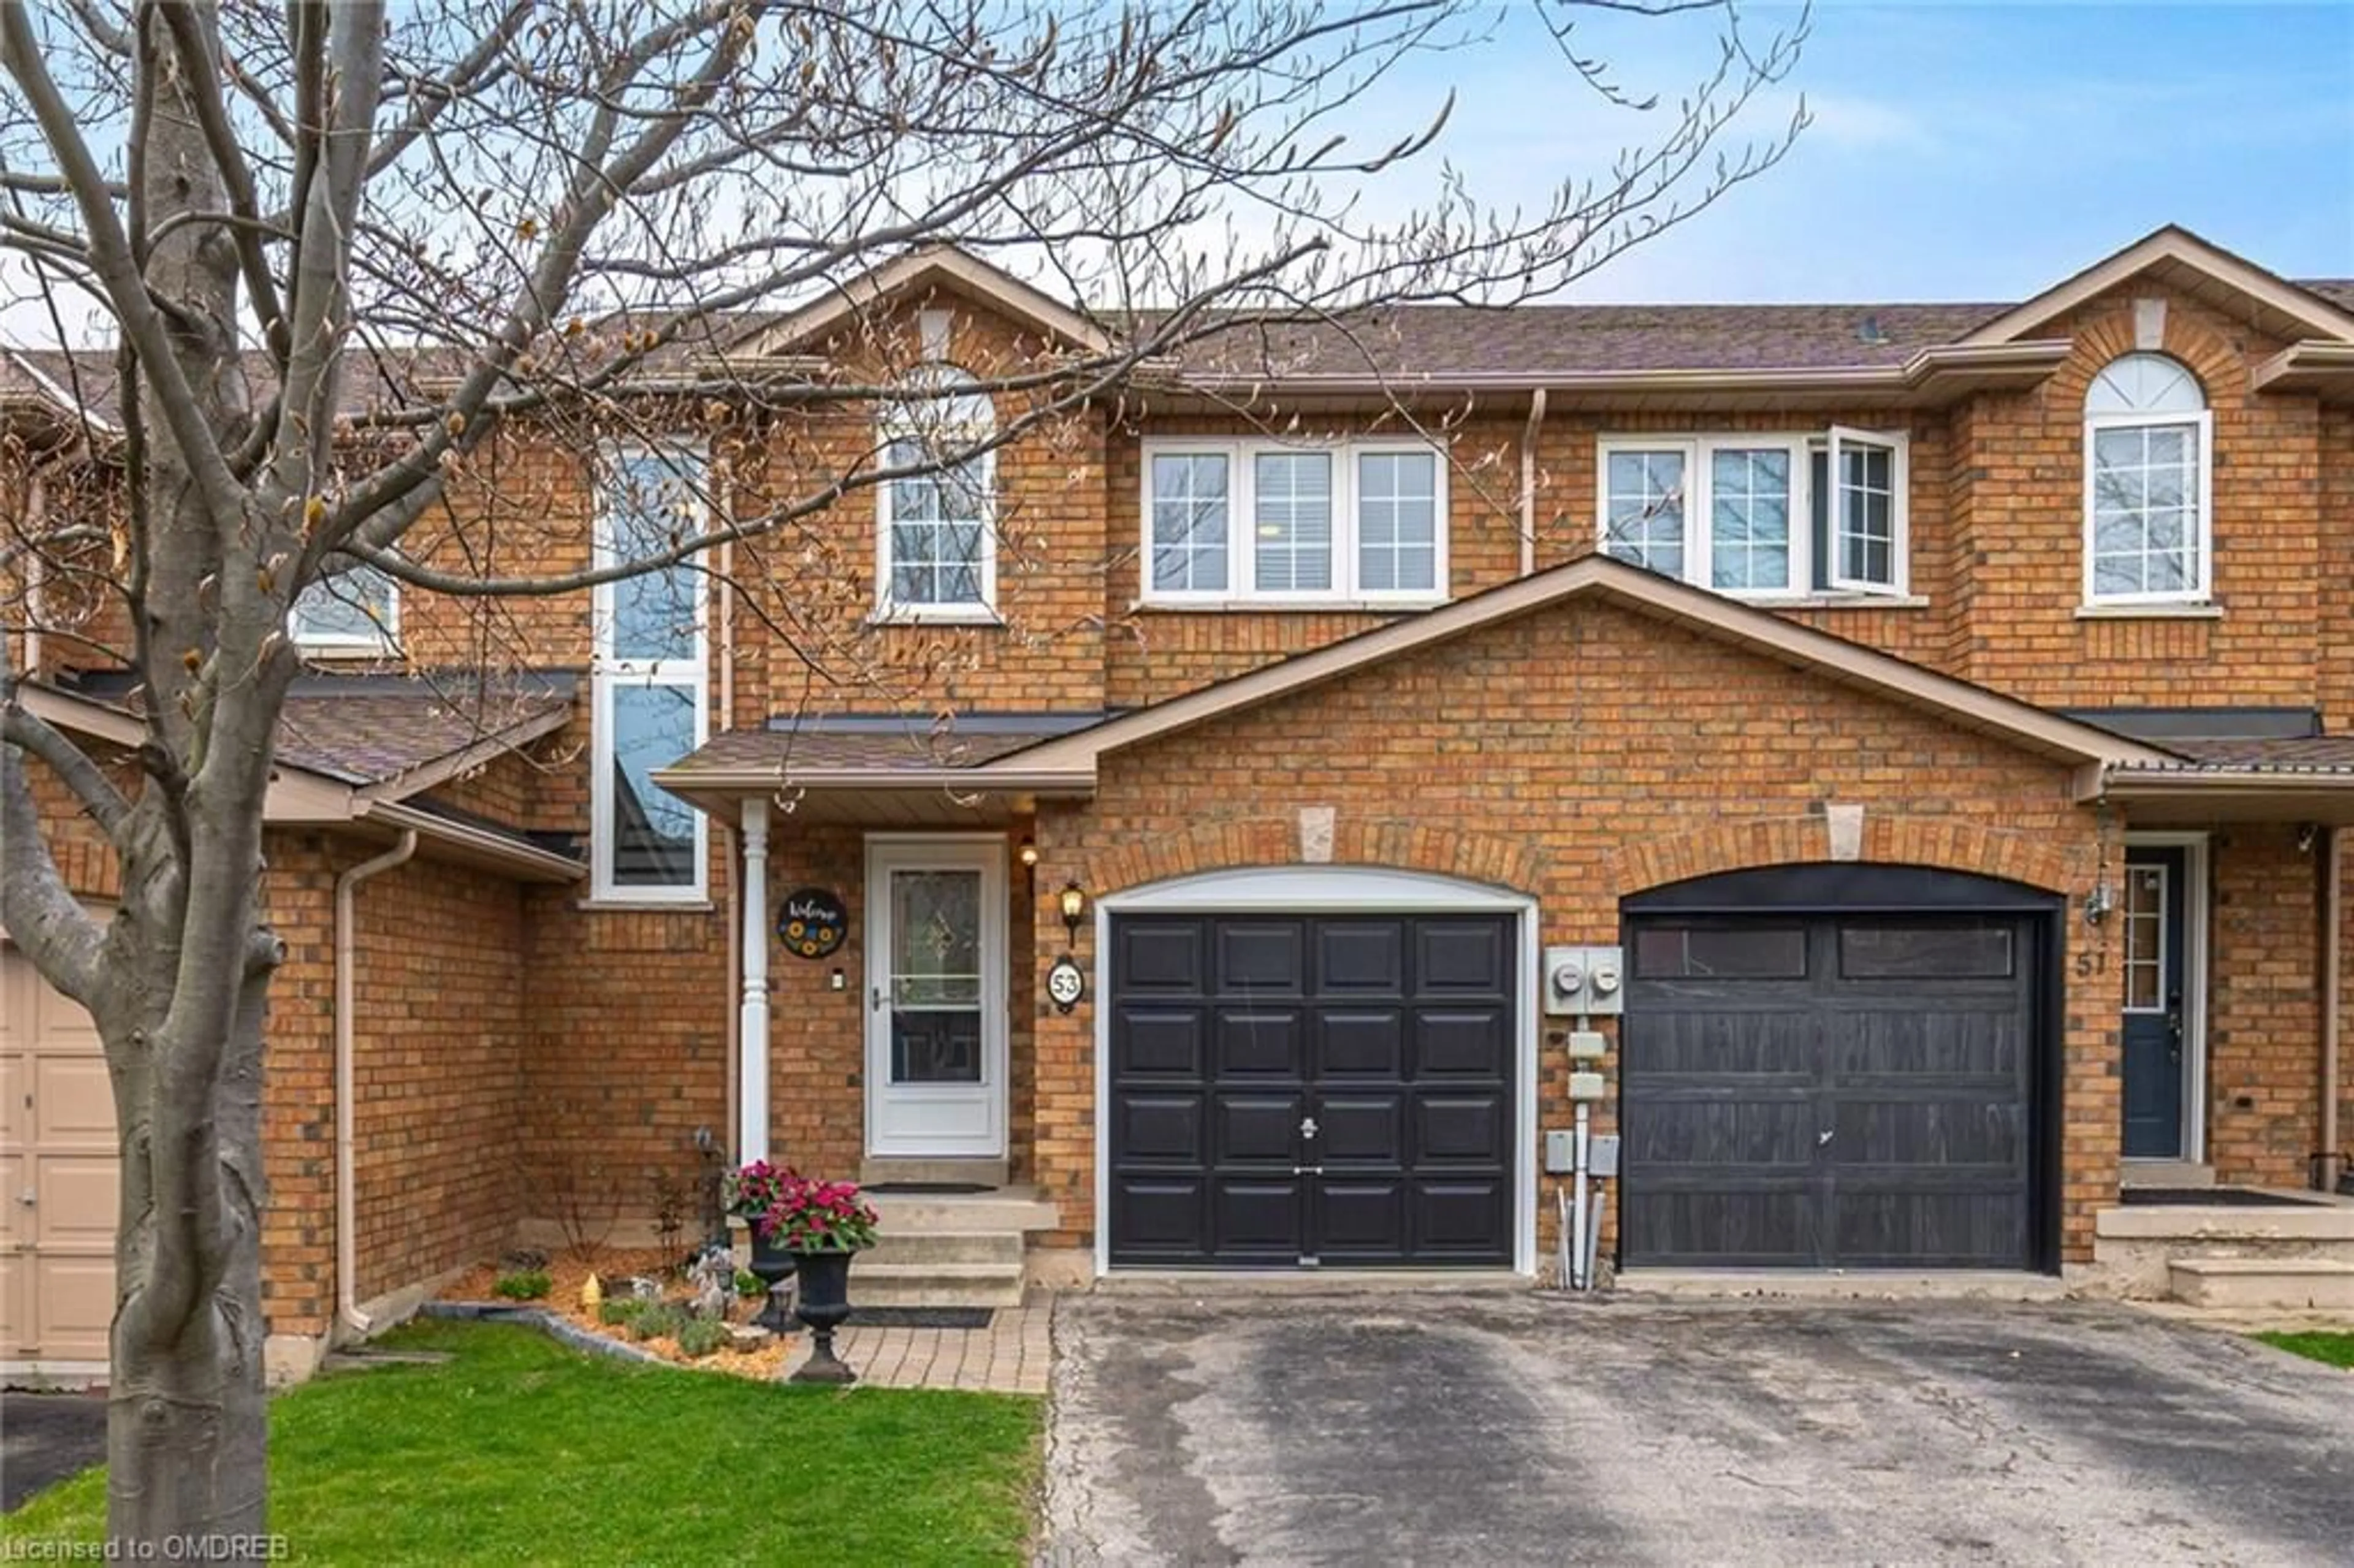 Home with brick exterior material for 53 Dawson Cres, Milton Ontario L9T 5H9